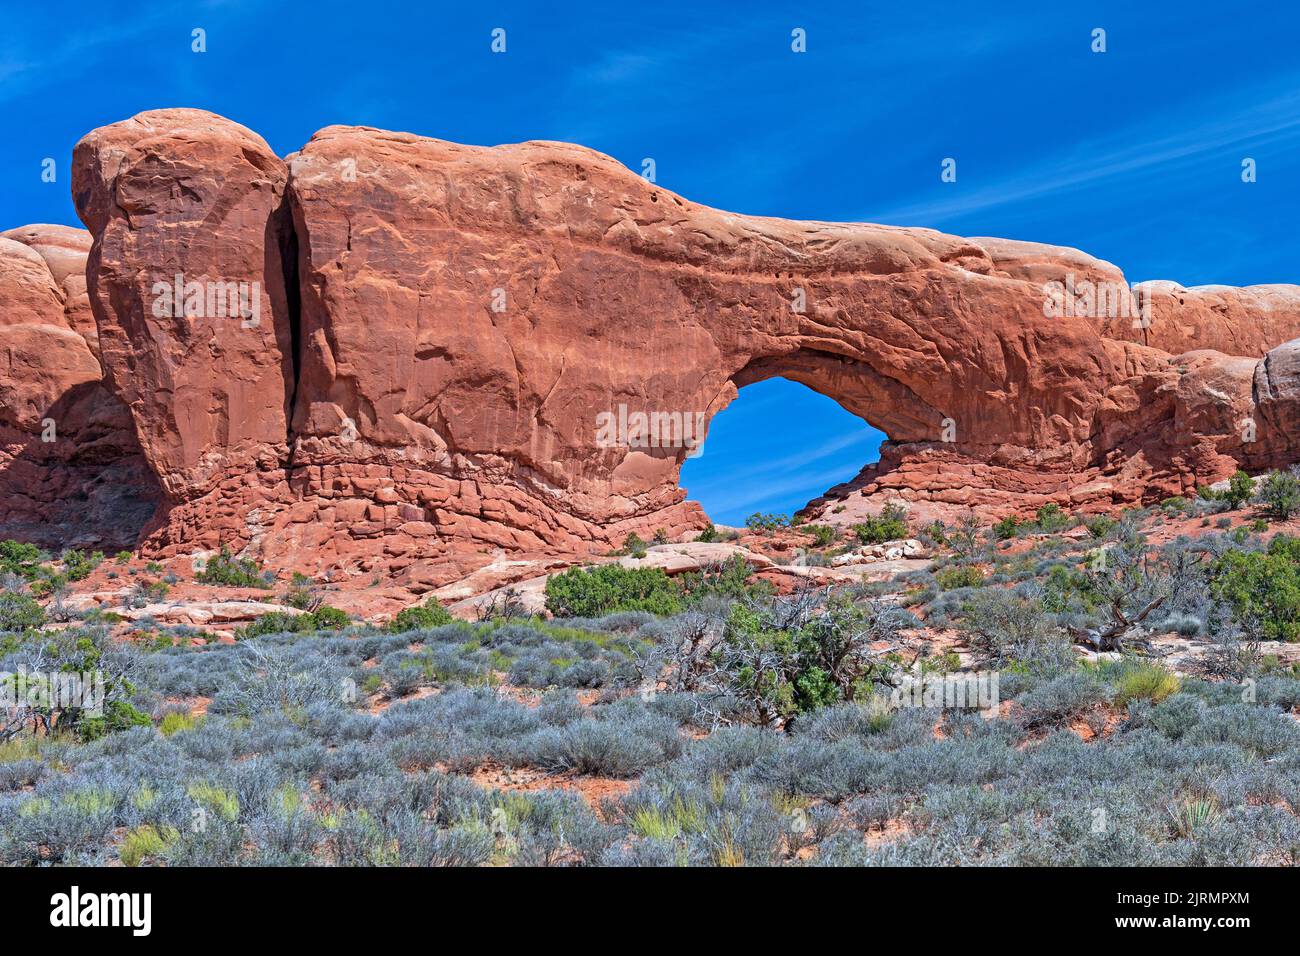 Dramatic Vista with a Window in the Desert in Arches National Park in Utah Stock Photo